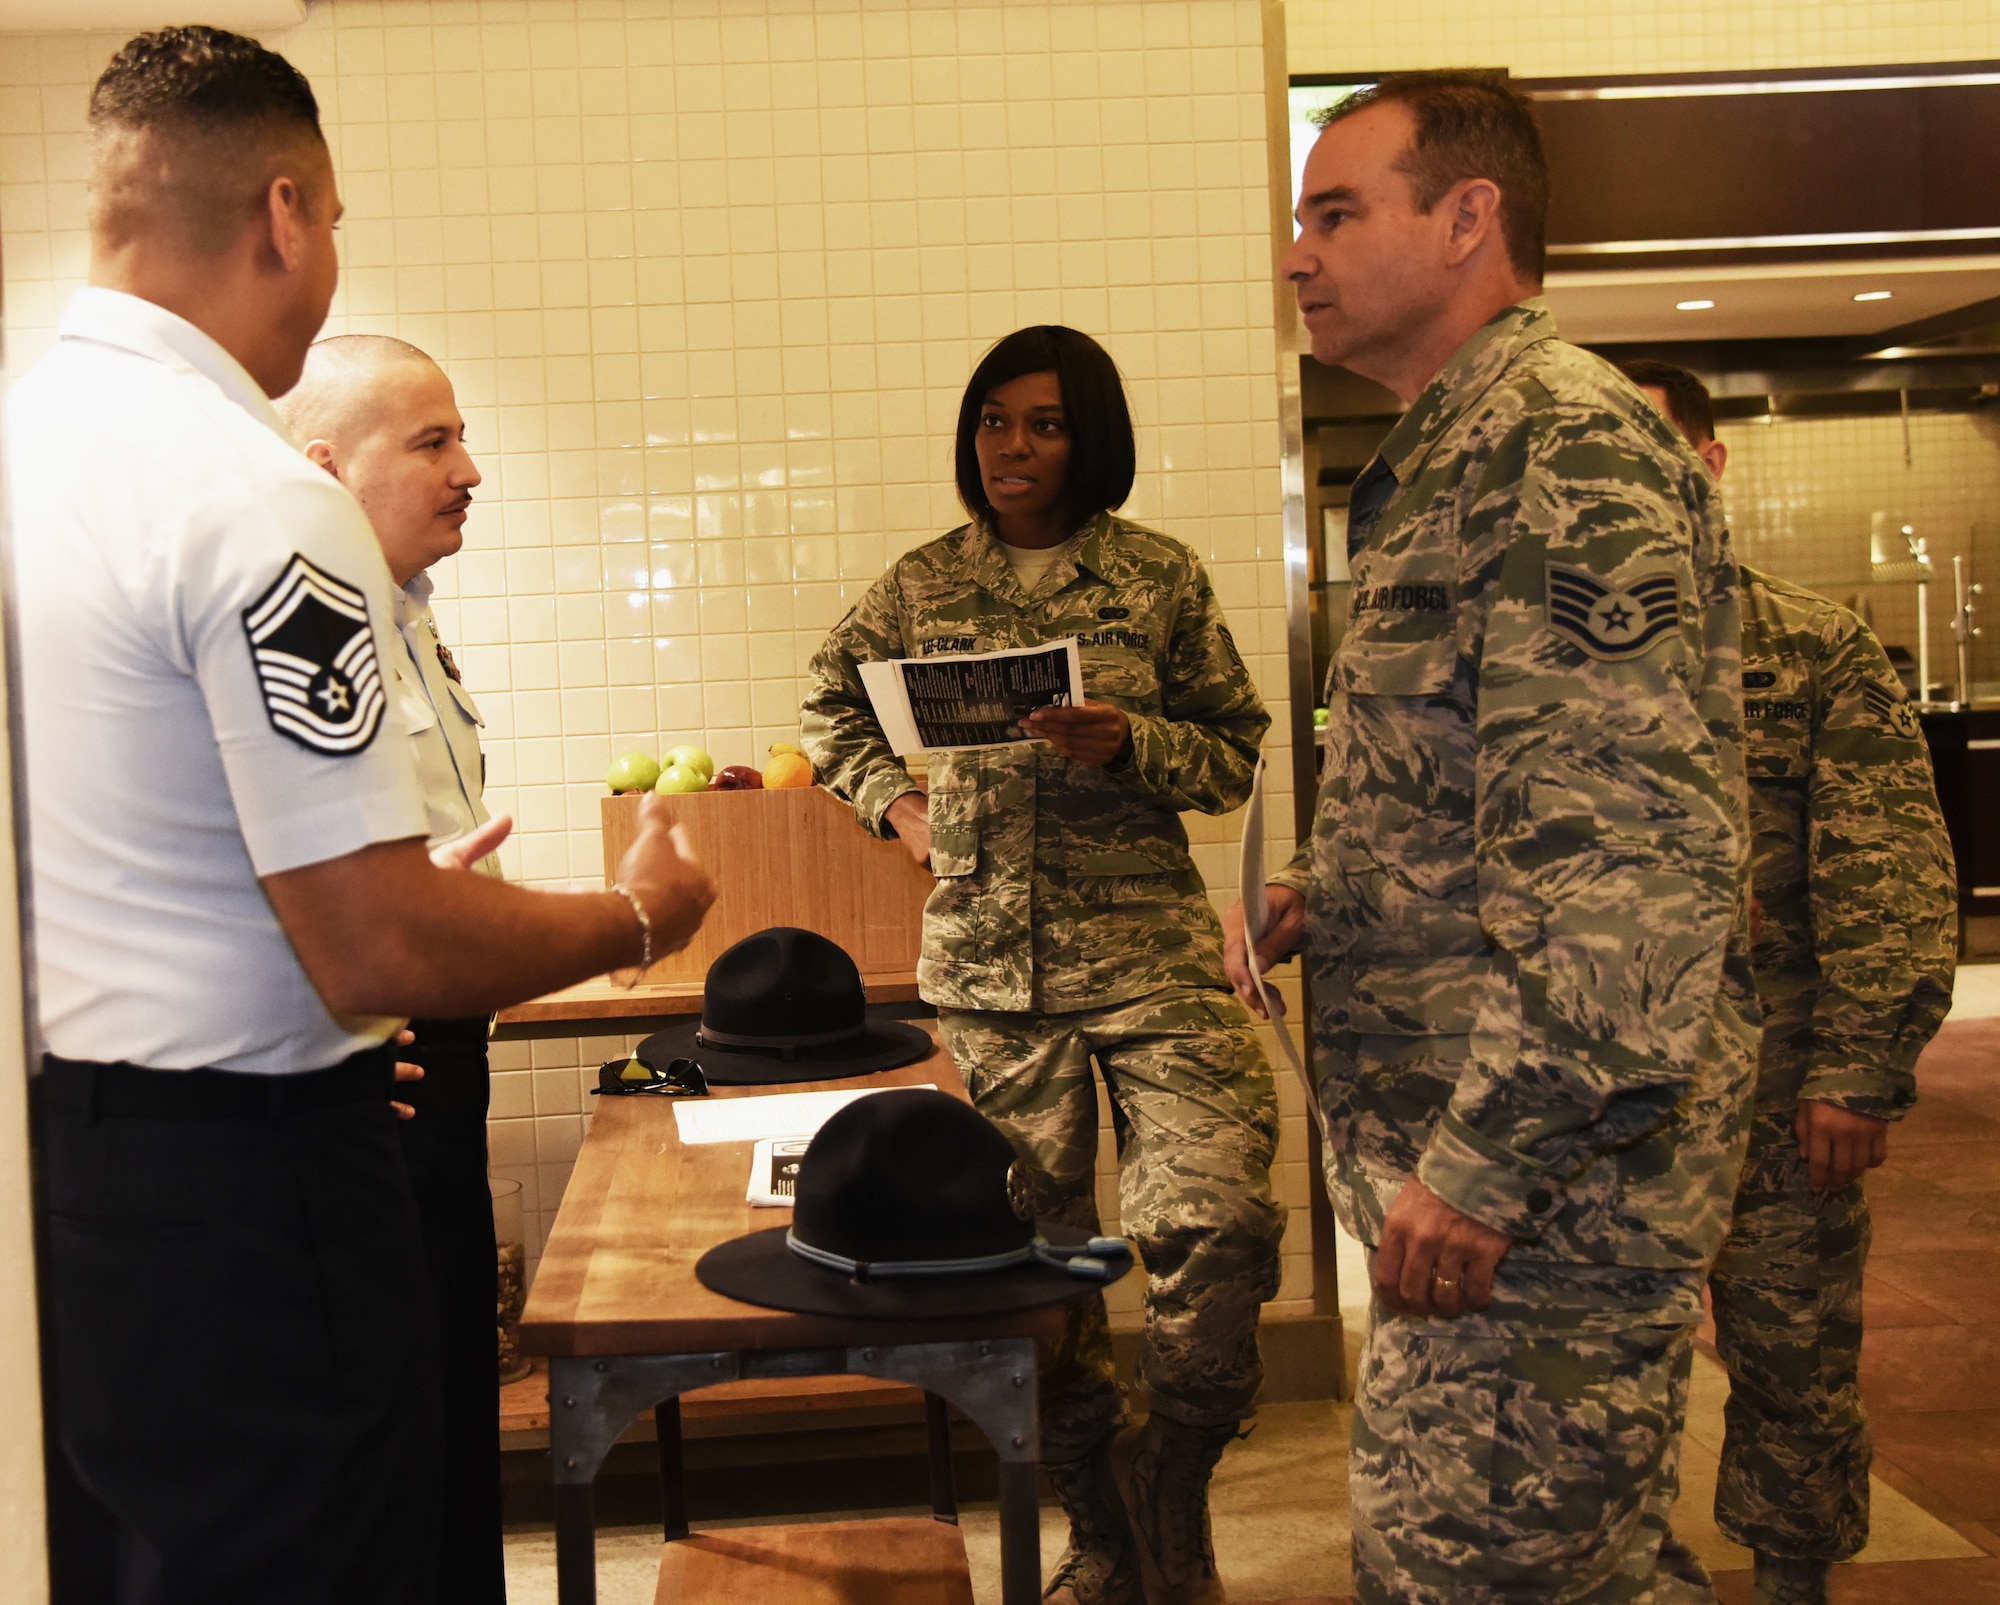 Senior Master Sgt. Ricardo Chavez and Tech. Sgt. Jesse Garcia, Military Training Instructor assigned to the 433rd Training Squadron, Lackland Air Force Base, Texas, talk with MacDill reservists at the Dining Facility, August 1, 2015. The MTIs attended the 927th Air Refueling Wing August Unit Training Assembly to advise reservists about opportunities to join the MTI Corps. Within the MTI corps there is many positions available for Staff Sgts. to Master Sgts. (U.S. Air Force Photo by Staff Sgt. Adam C. Borgman)